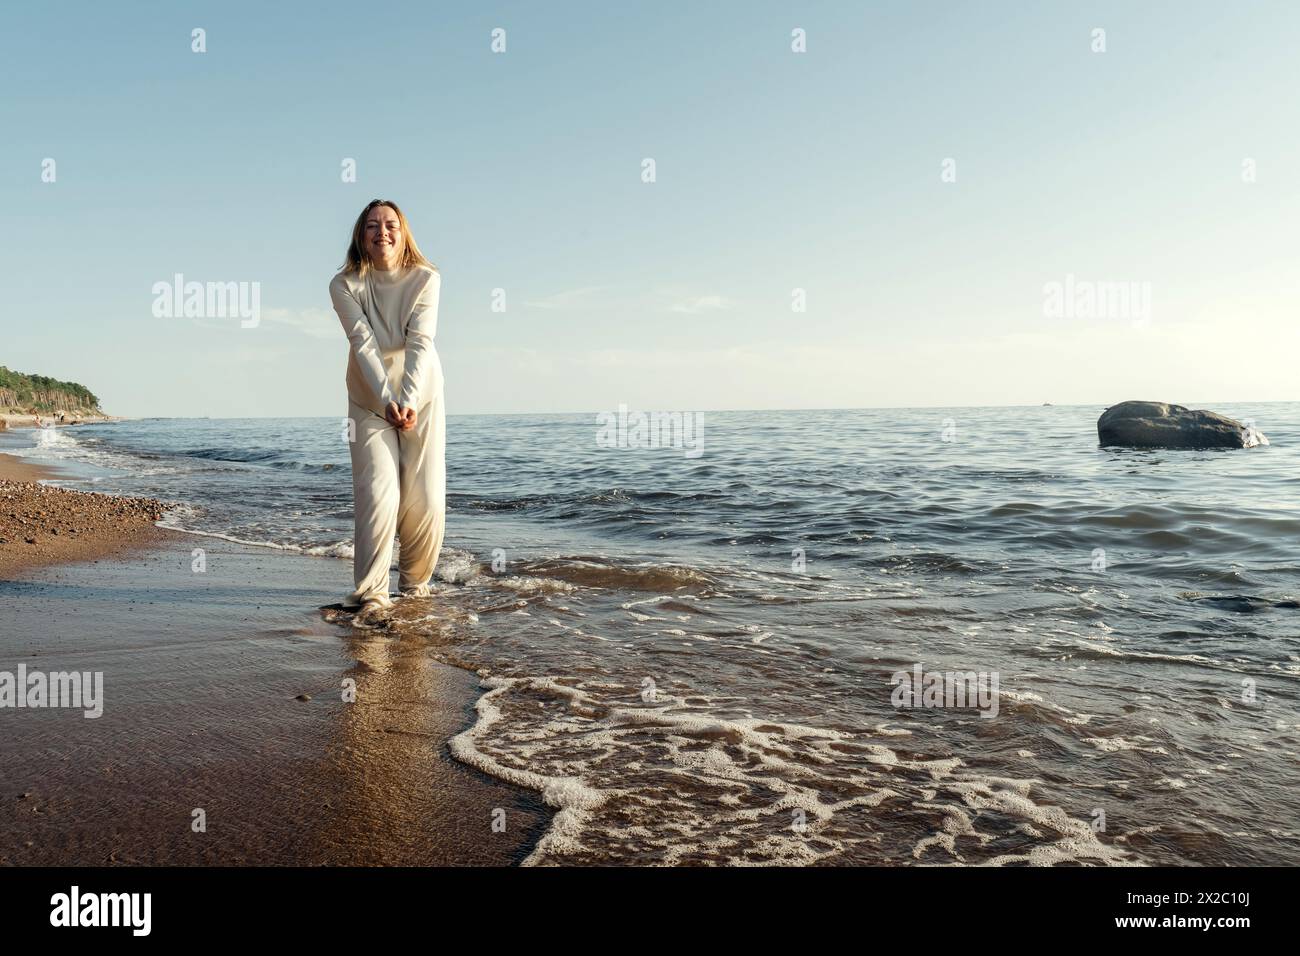 A woman is standing in the water at the beach, with waves gently lapping around her. She gazes out towards the horizon under the clear blue sky. Stock Photo